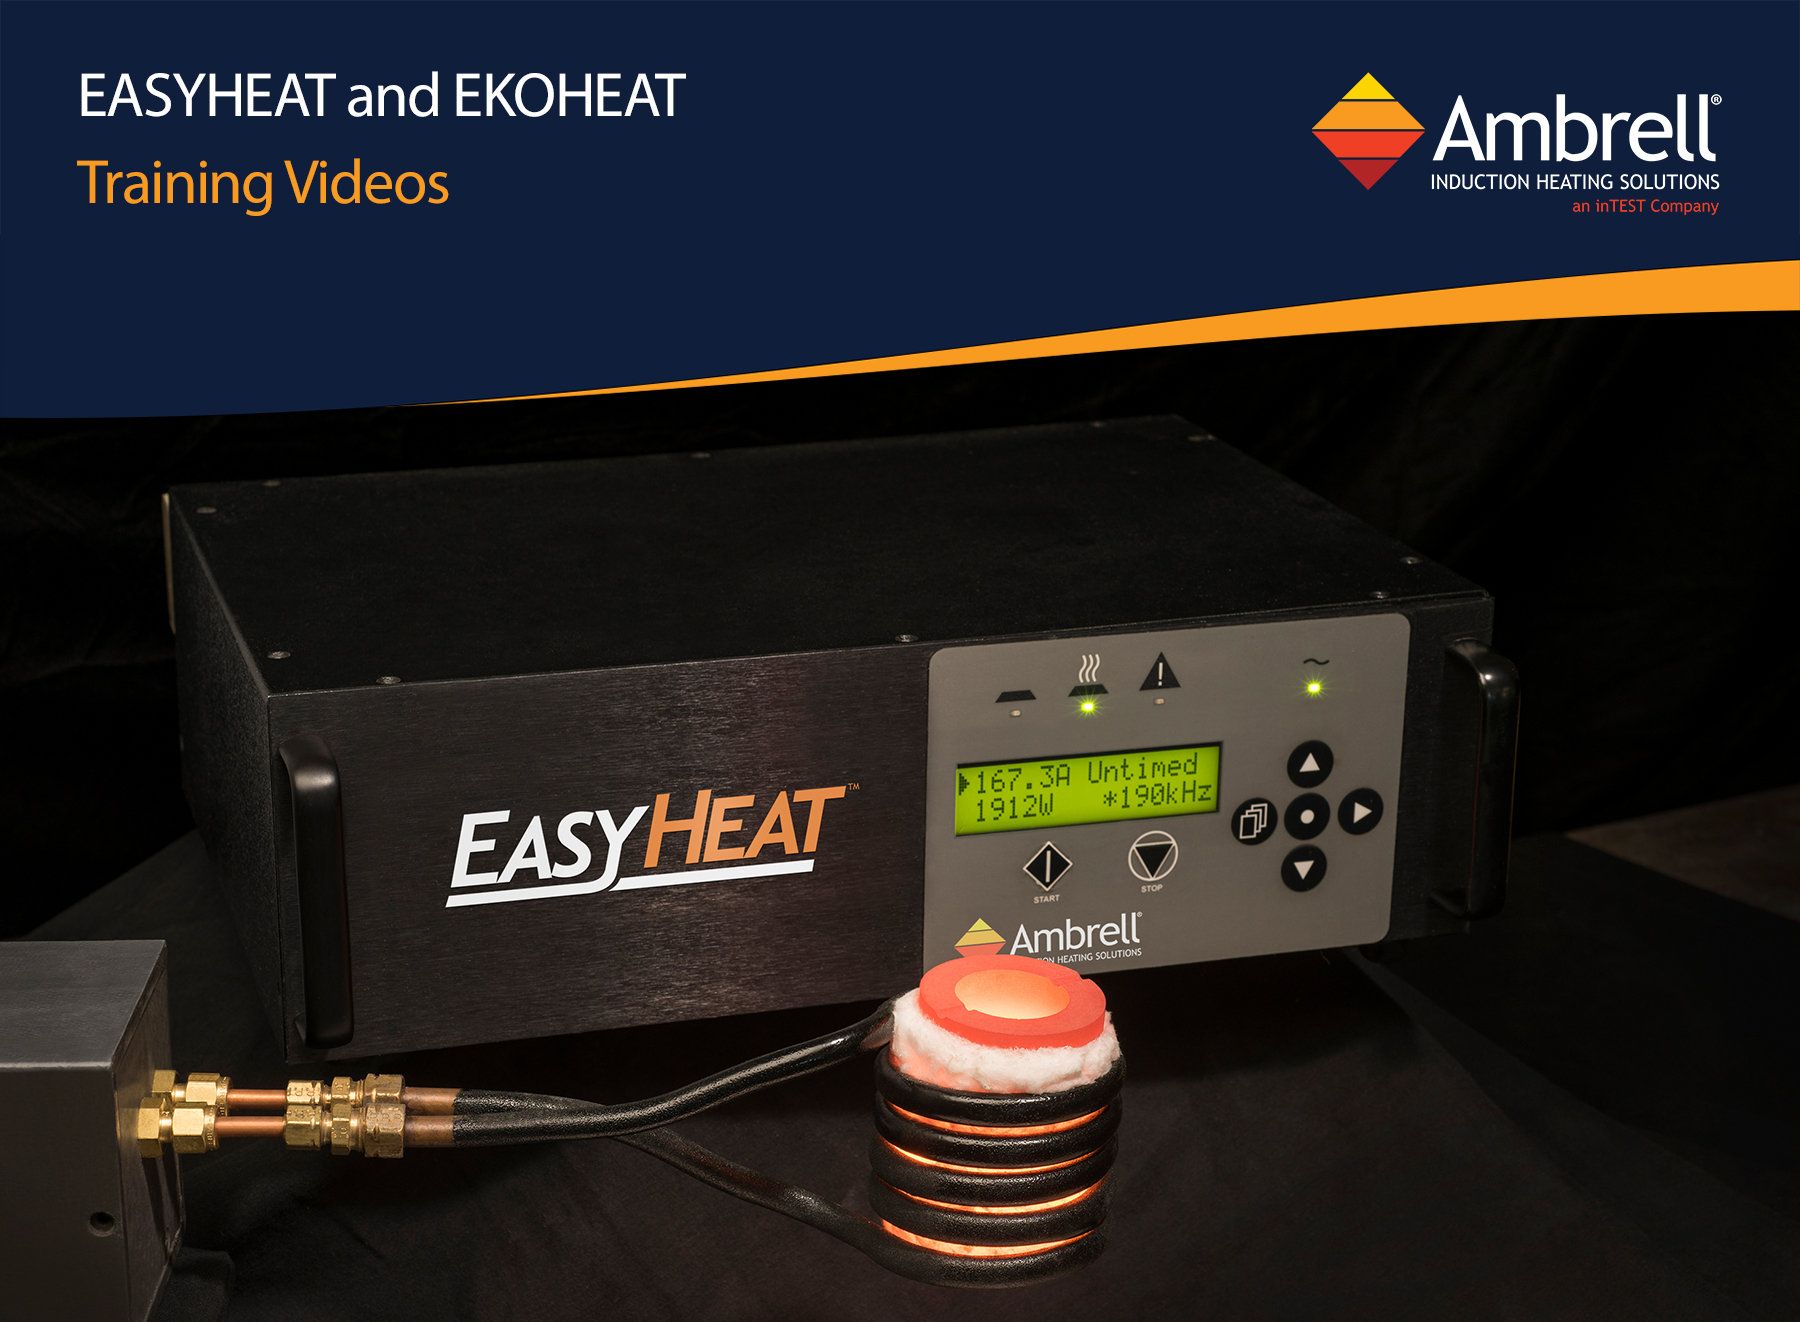 Ambrell offers EASYHEAT and EKOHEAT induction heating training videos